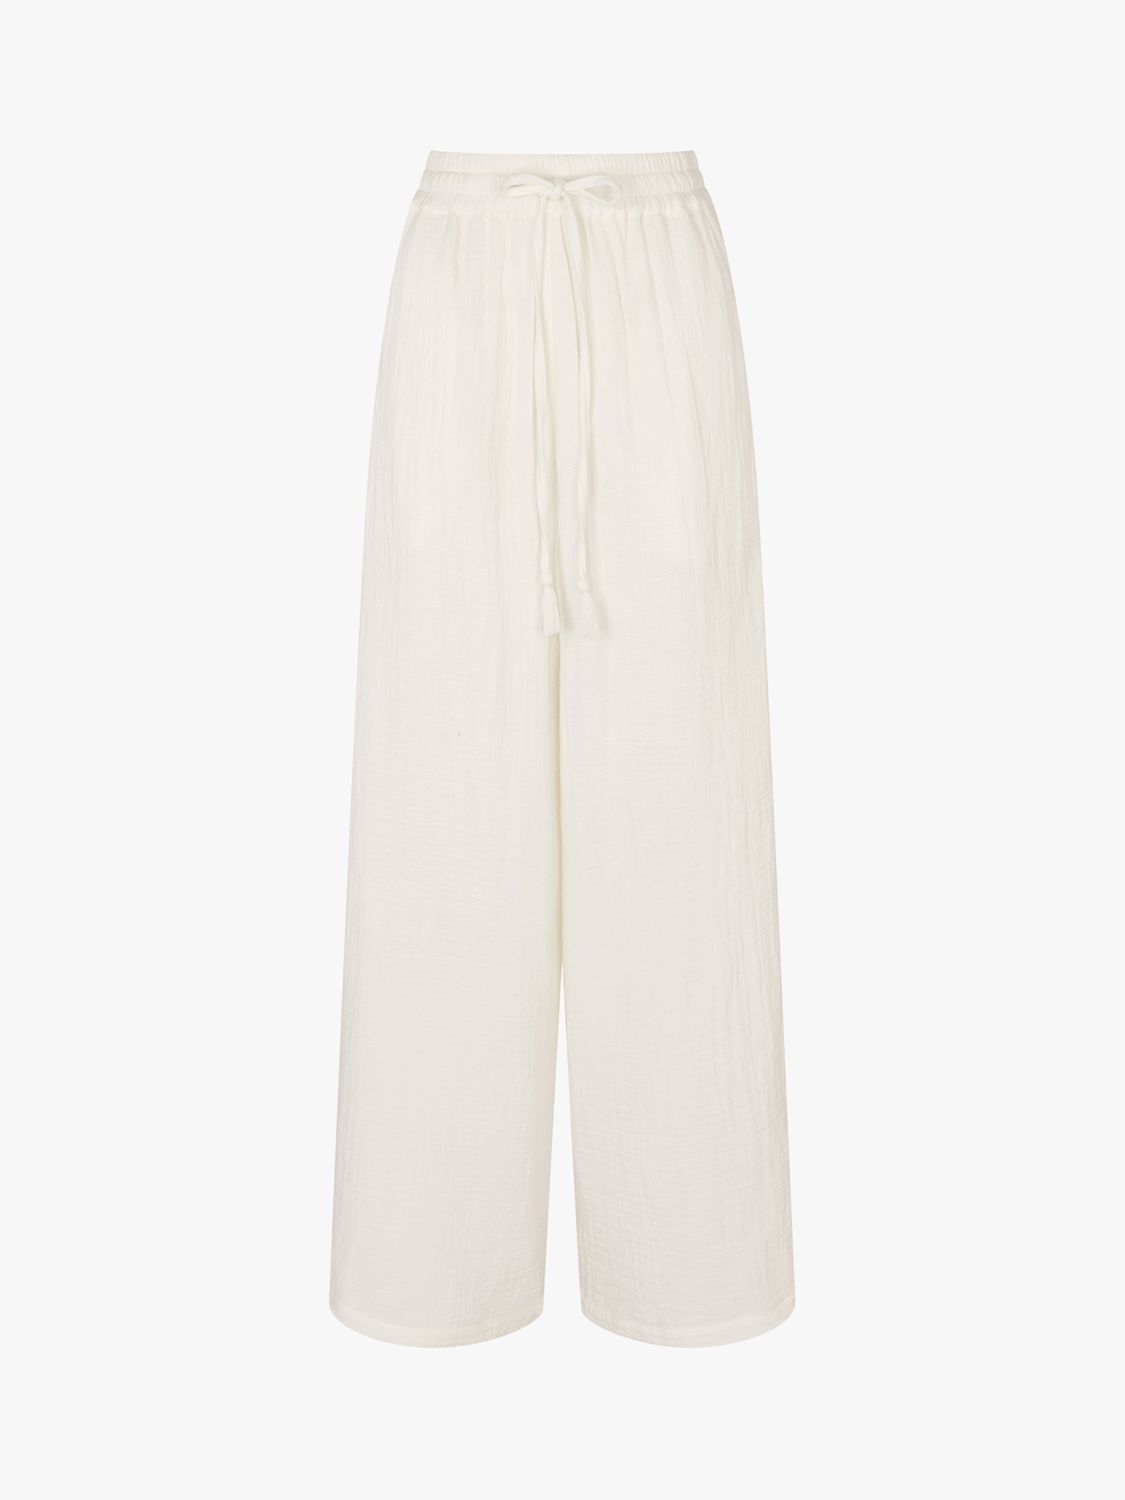 Accessorize Crinkle Cotton Beach Trousers, White, XS